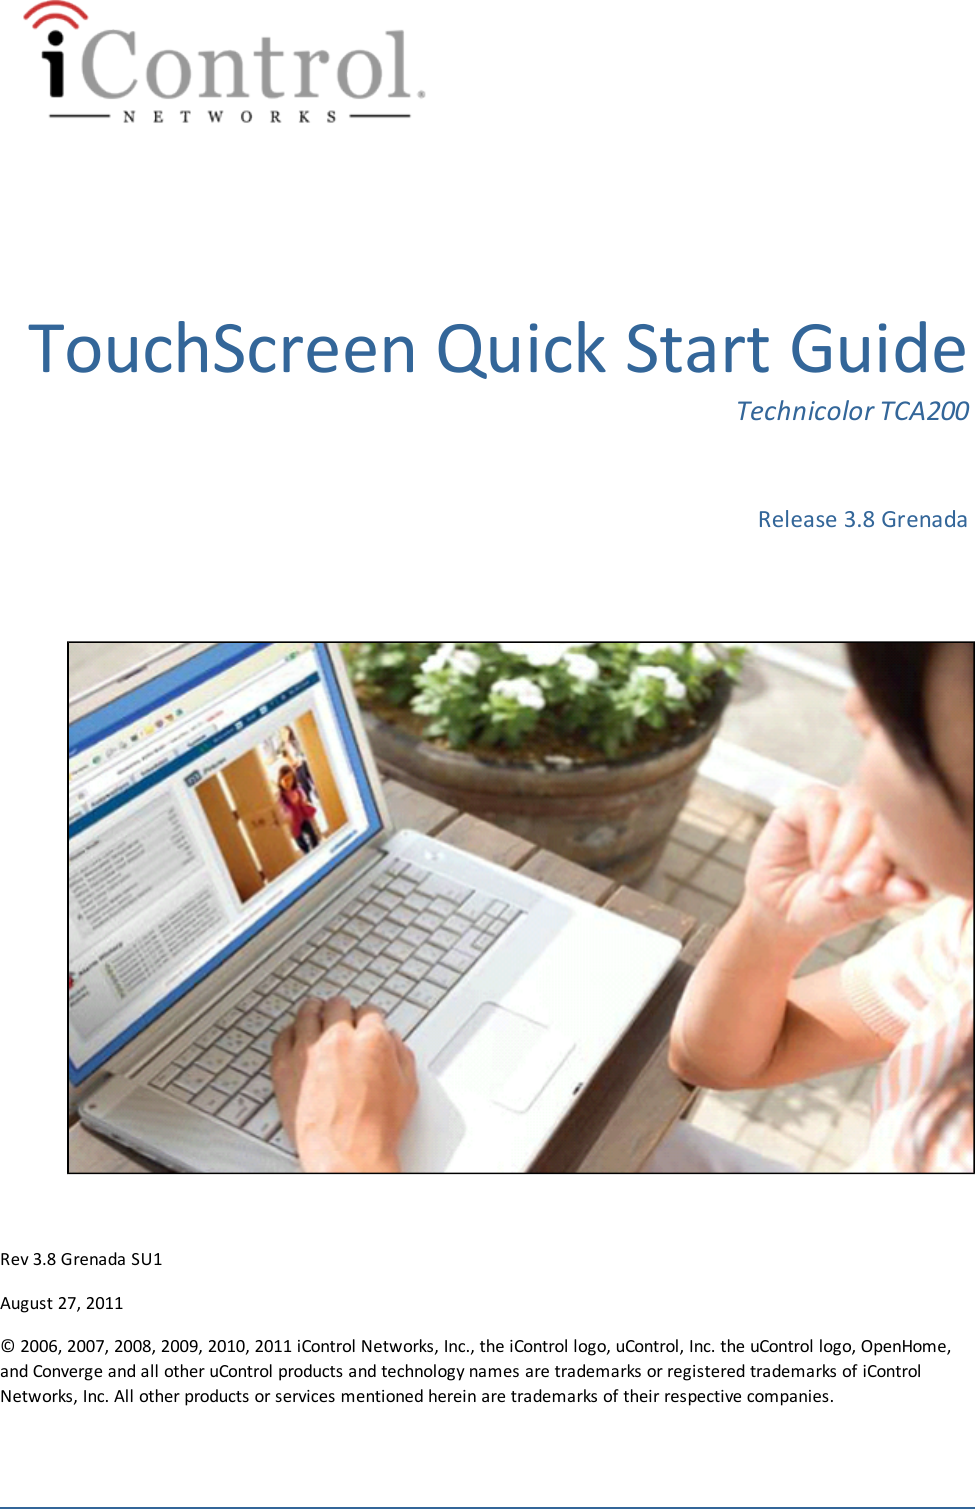 TouchScreen Quick Start GuideTechnicolor TCA200Release 3.8 GrenadaRev 3.8 Grenada SU1August 27, 2011© 2006, 2007, 2008, 2009, 2010, 2011 iControl Networks, Inc., the iControl logo, uControl, Inc. the uControl logo, OpenHome,and Converge and all other uControl products and technology names are trademarks or registered trademarks of iControlNetworks, Inc. All other products or services mentioned herein are trademarks of their respective companies.